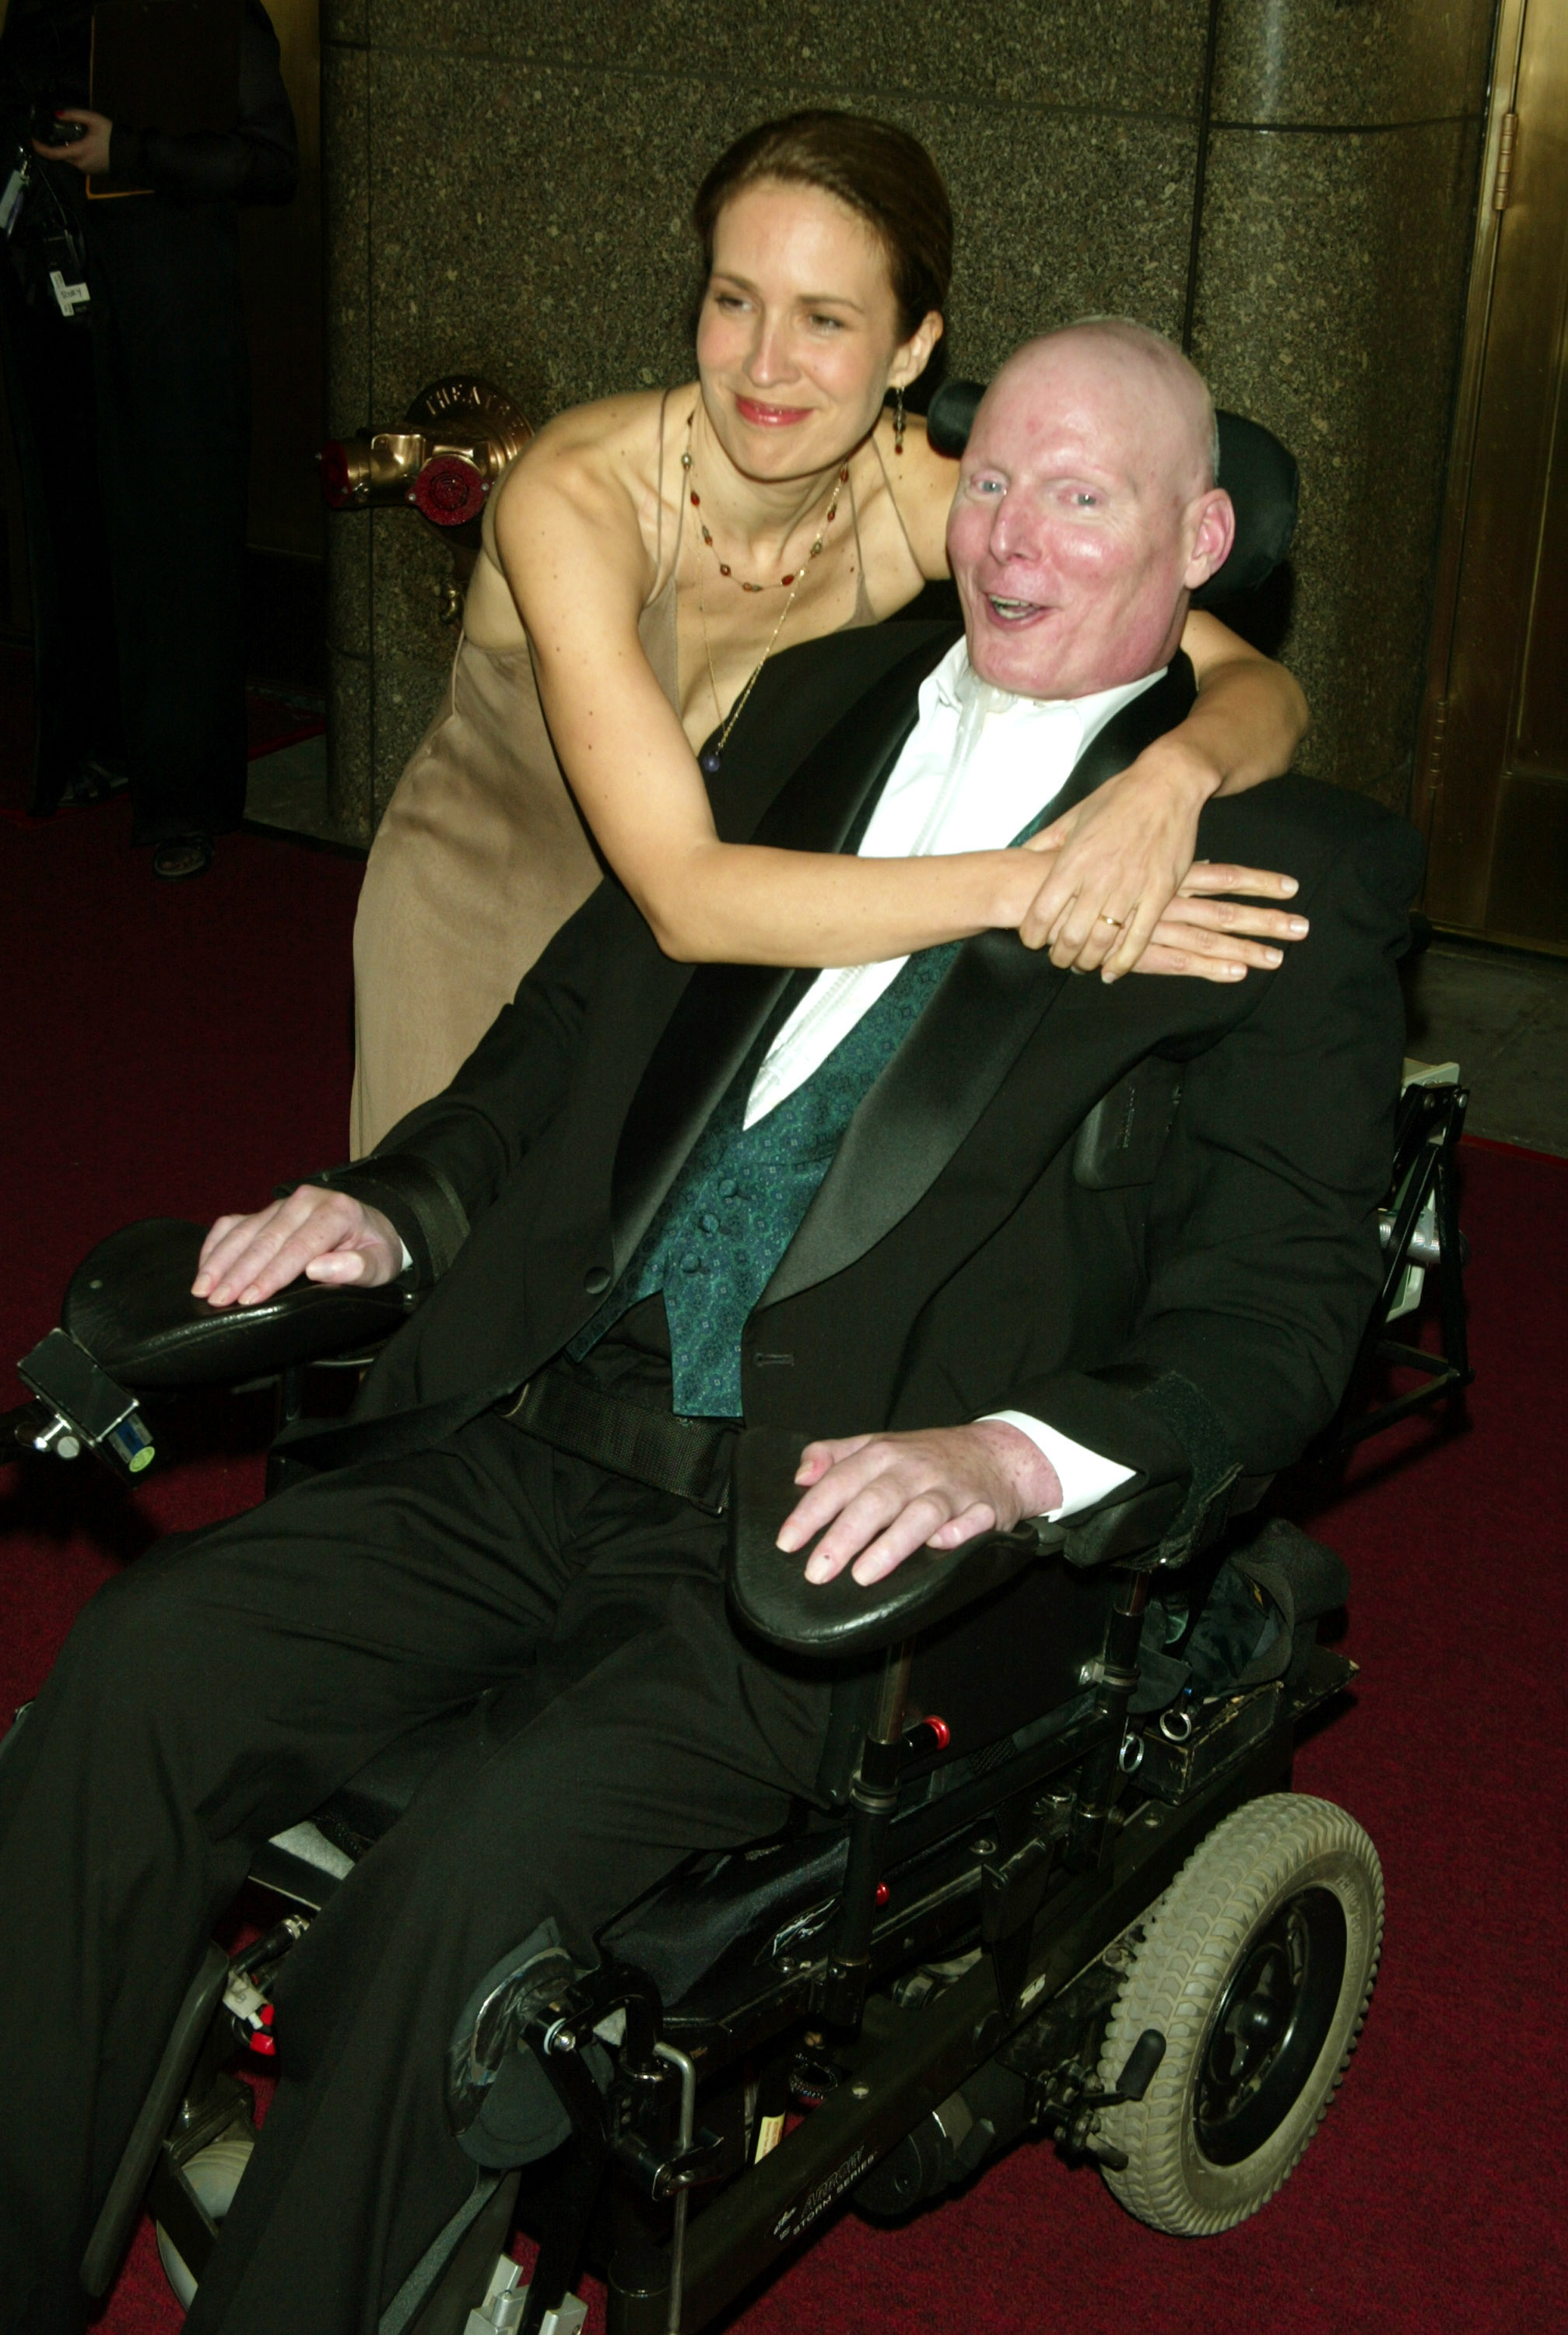 Dana Reeve and Christopher Reeve during 2003 Tony Awards at Radio City Music Hall in New York City, New York | Source: Getty Images